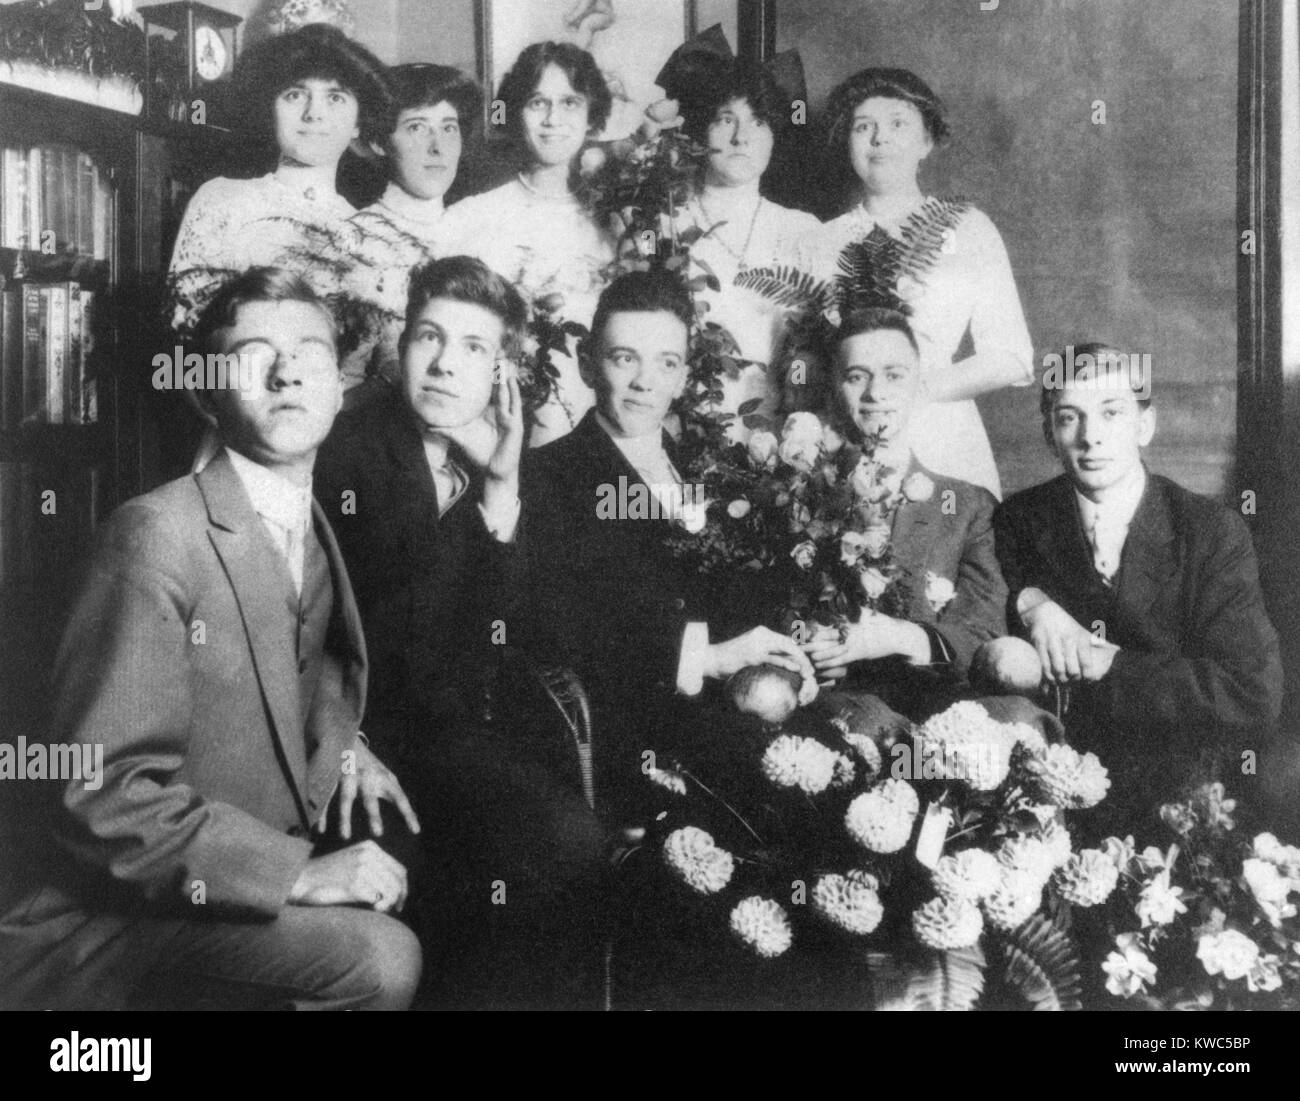 Young J. Edgar Hoover with a group of teenagers, ca. 1912. The flowers and nice clothes suggest an important occasion, perhaps high school graduation from Central High, in Washington, D.C. (BSLOC 2015 14 21) Stock Photo